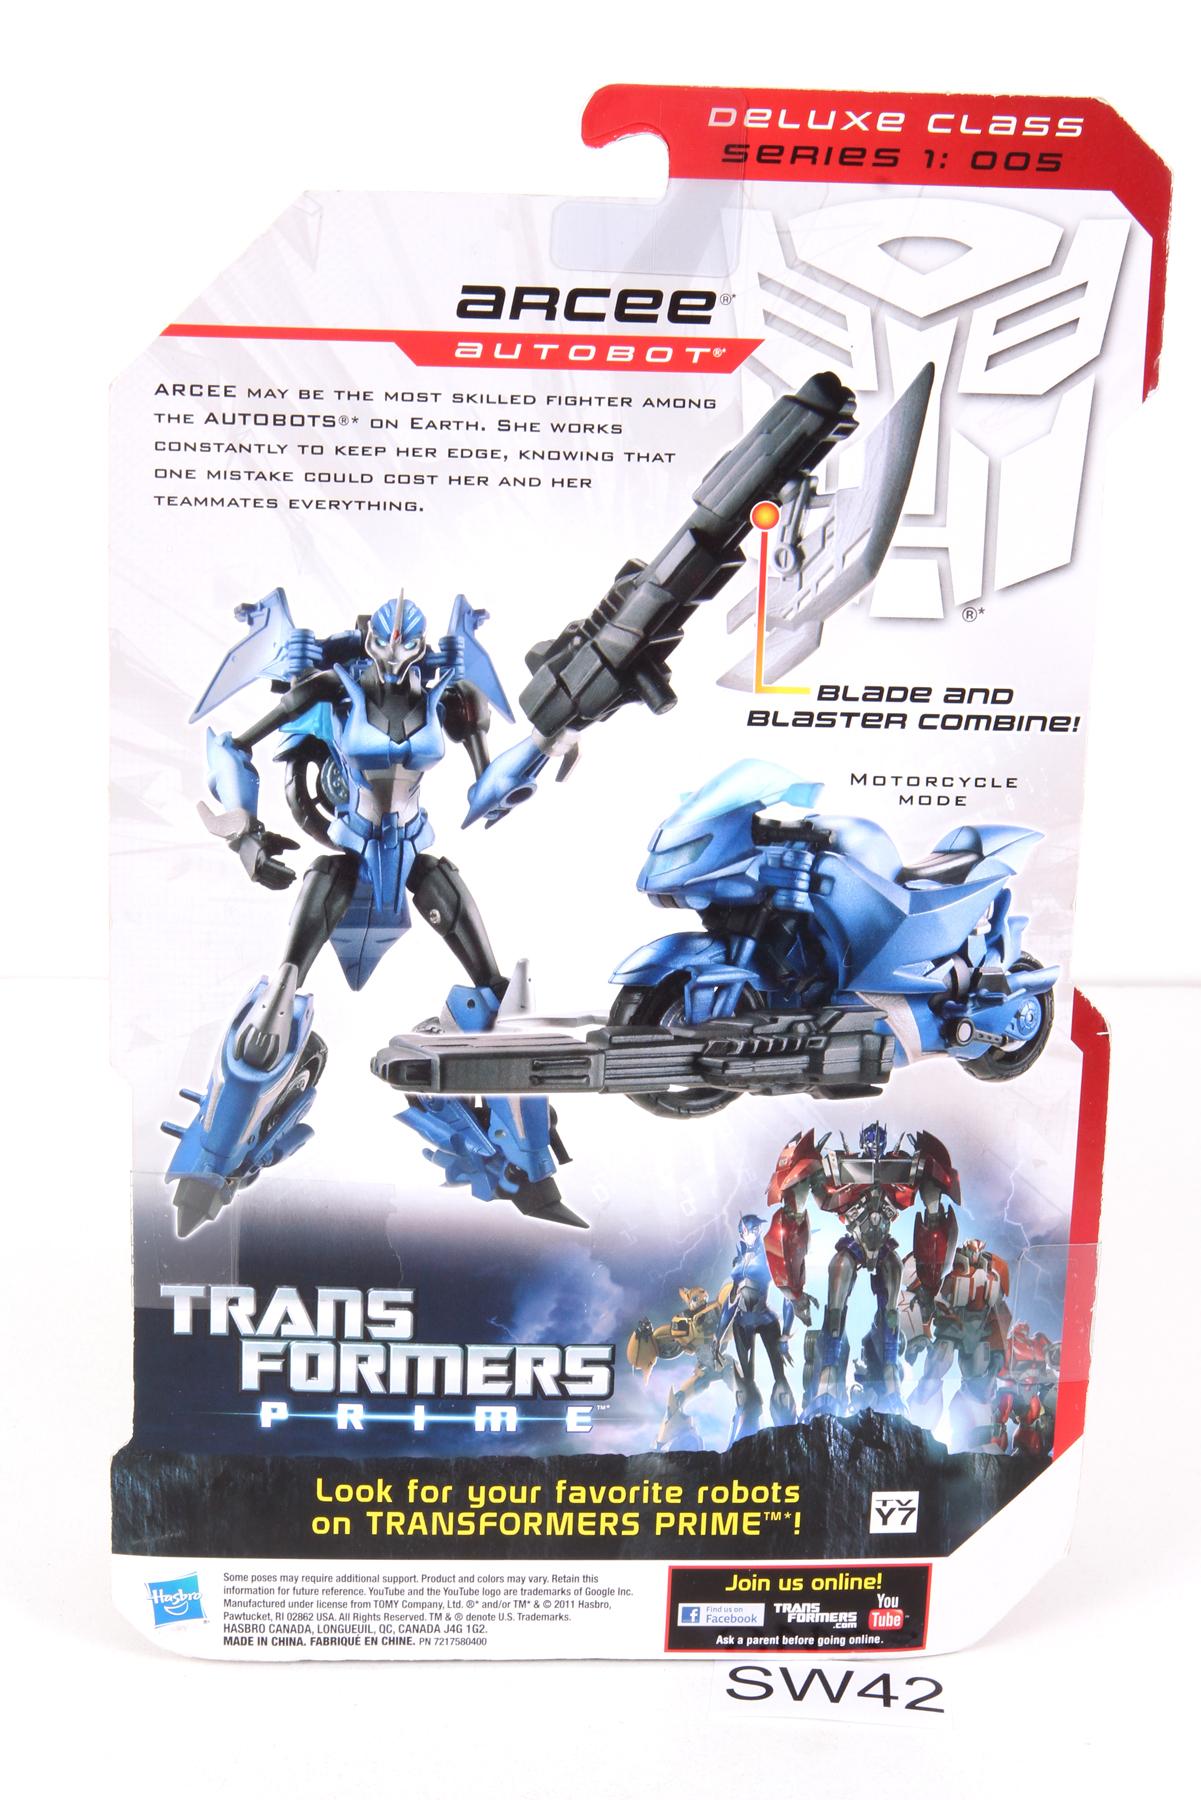 Transformers Prime First Edition Deluxe Arcee Deluxe Action Figure Hasbro -  ToyWiz